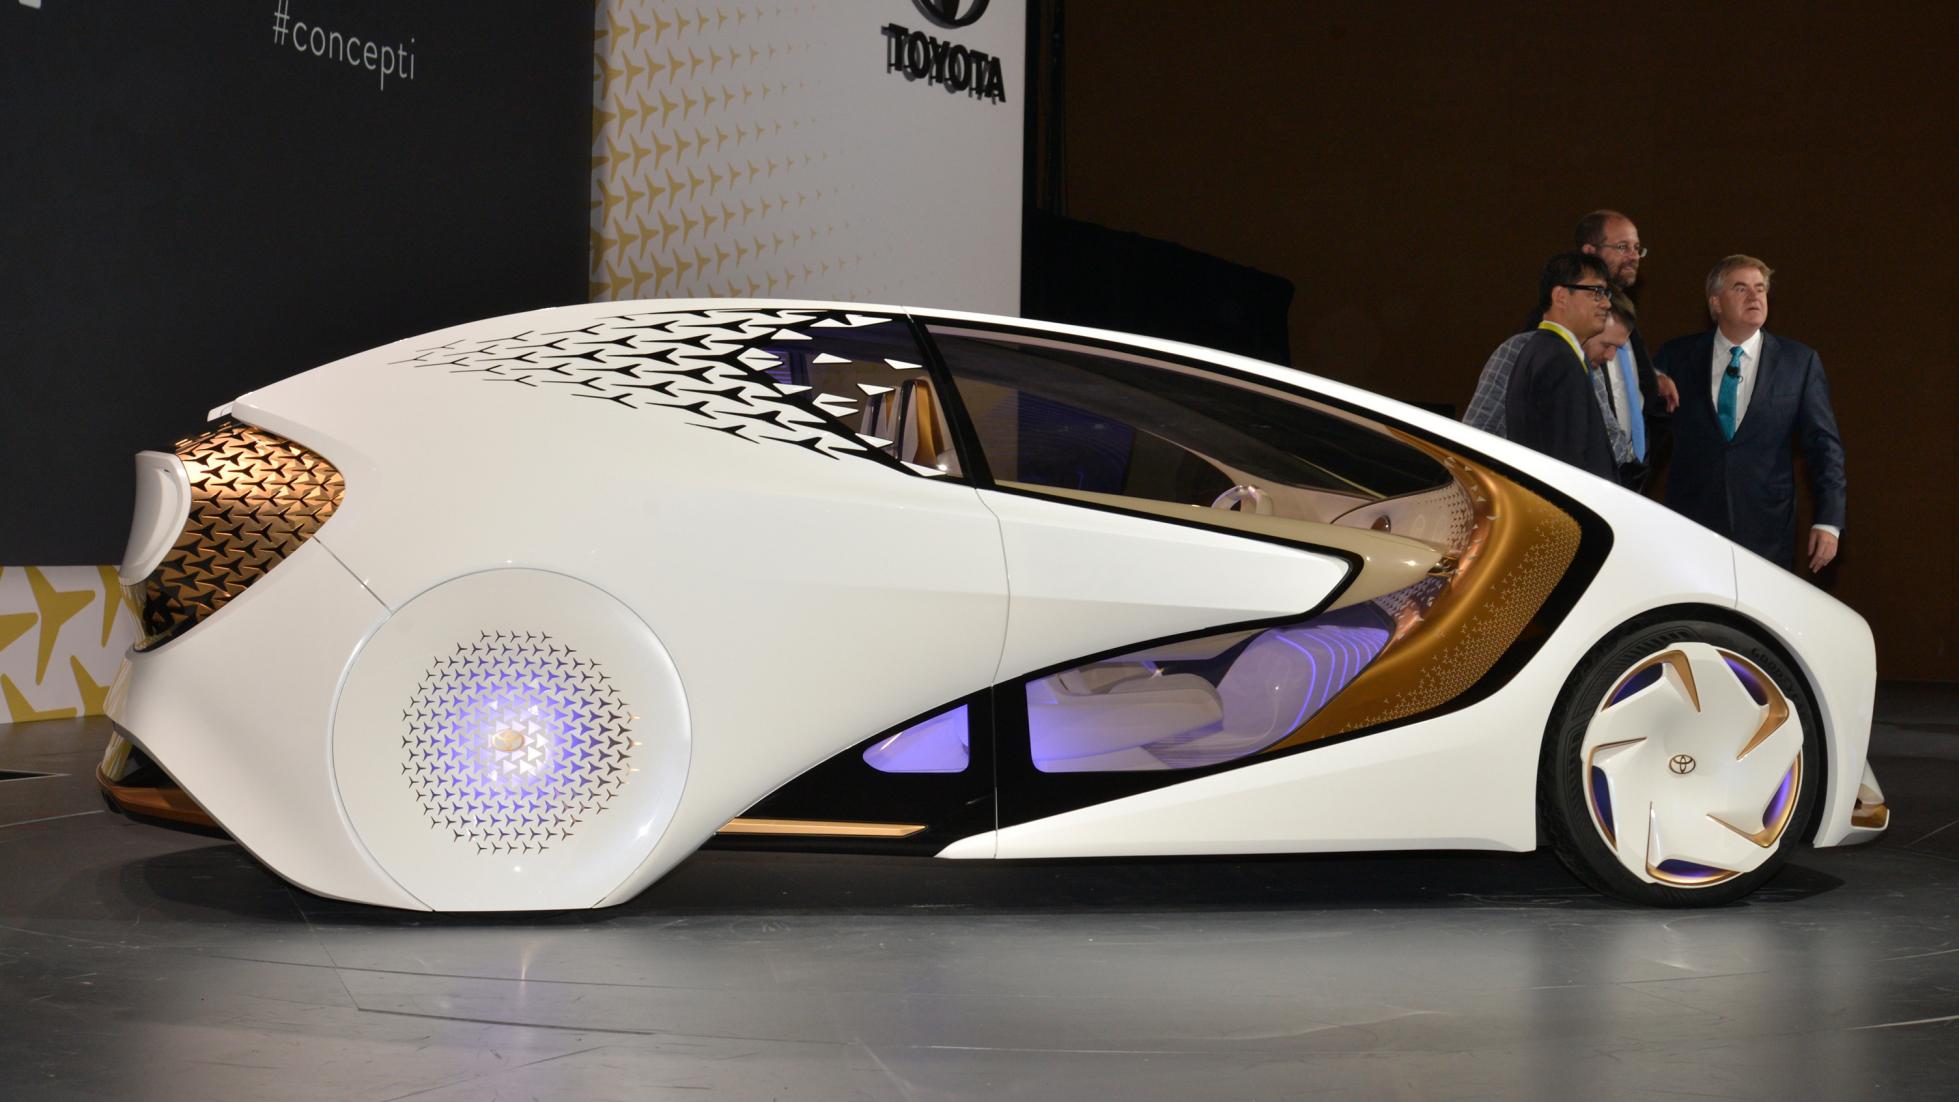 The new Toyota Concept-i could be the Car of the Future